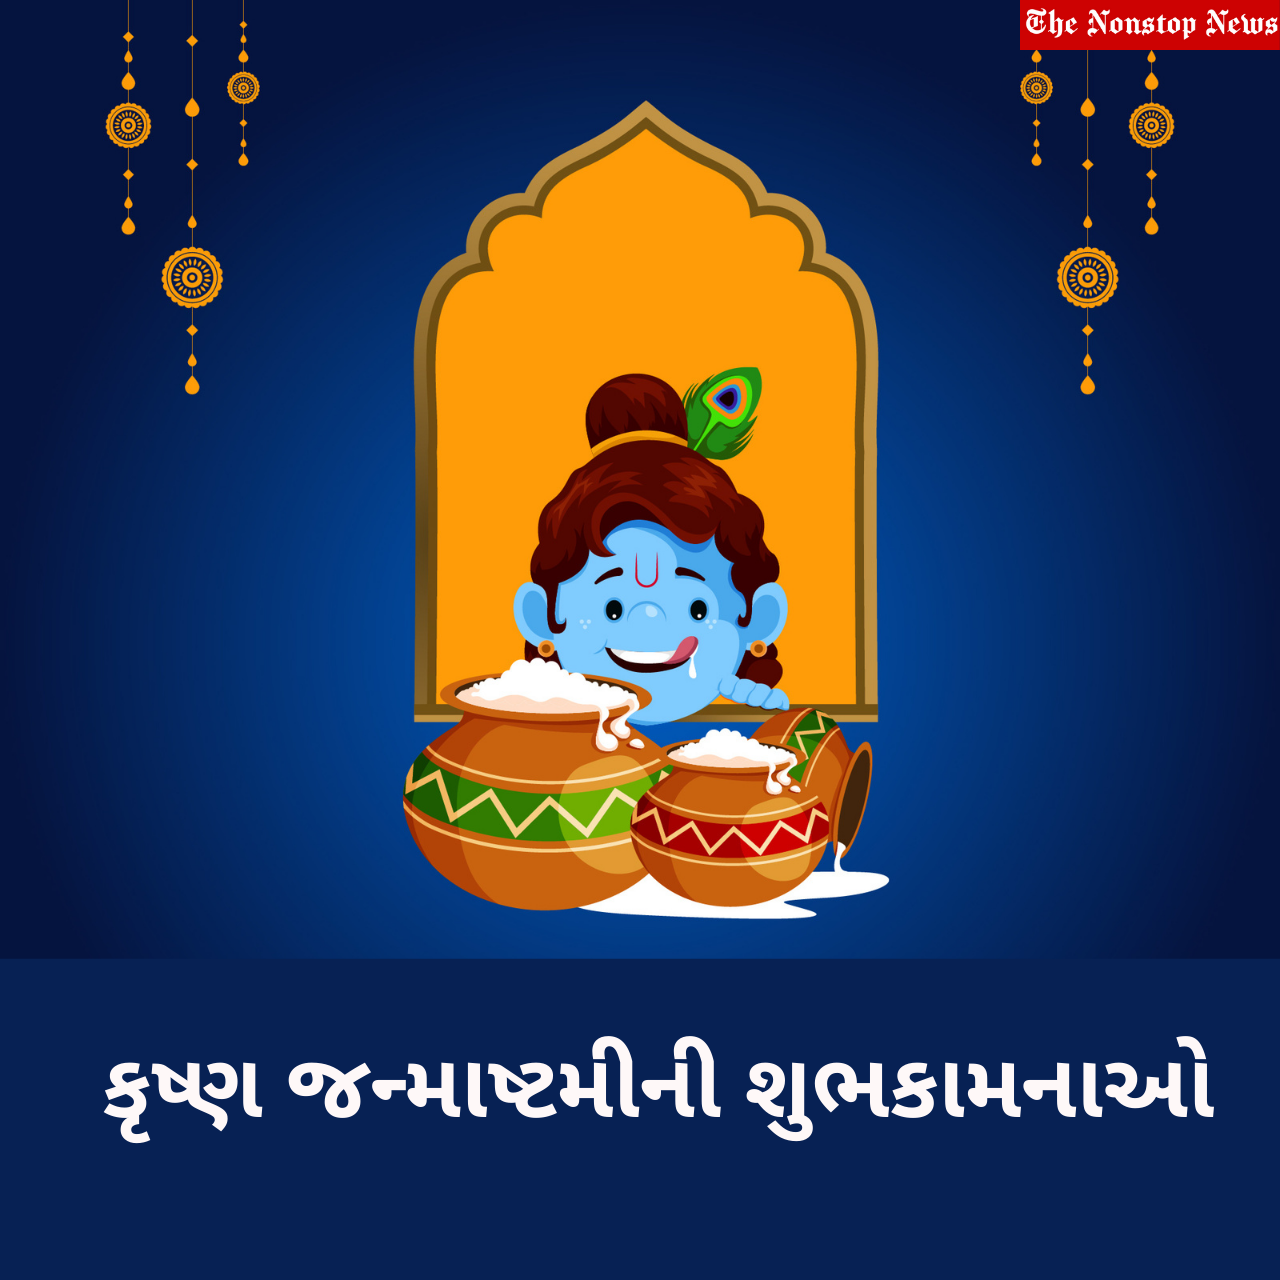 Happy Krishna Janmashtami 2021 Gujarati Wishes, Messages, Quotes, HD Images, Messages, Greetings, Facebook, and WhatsApp Status to share